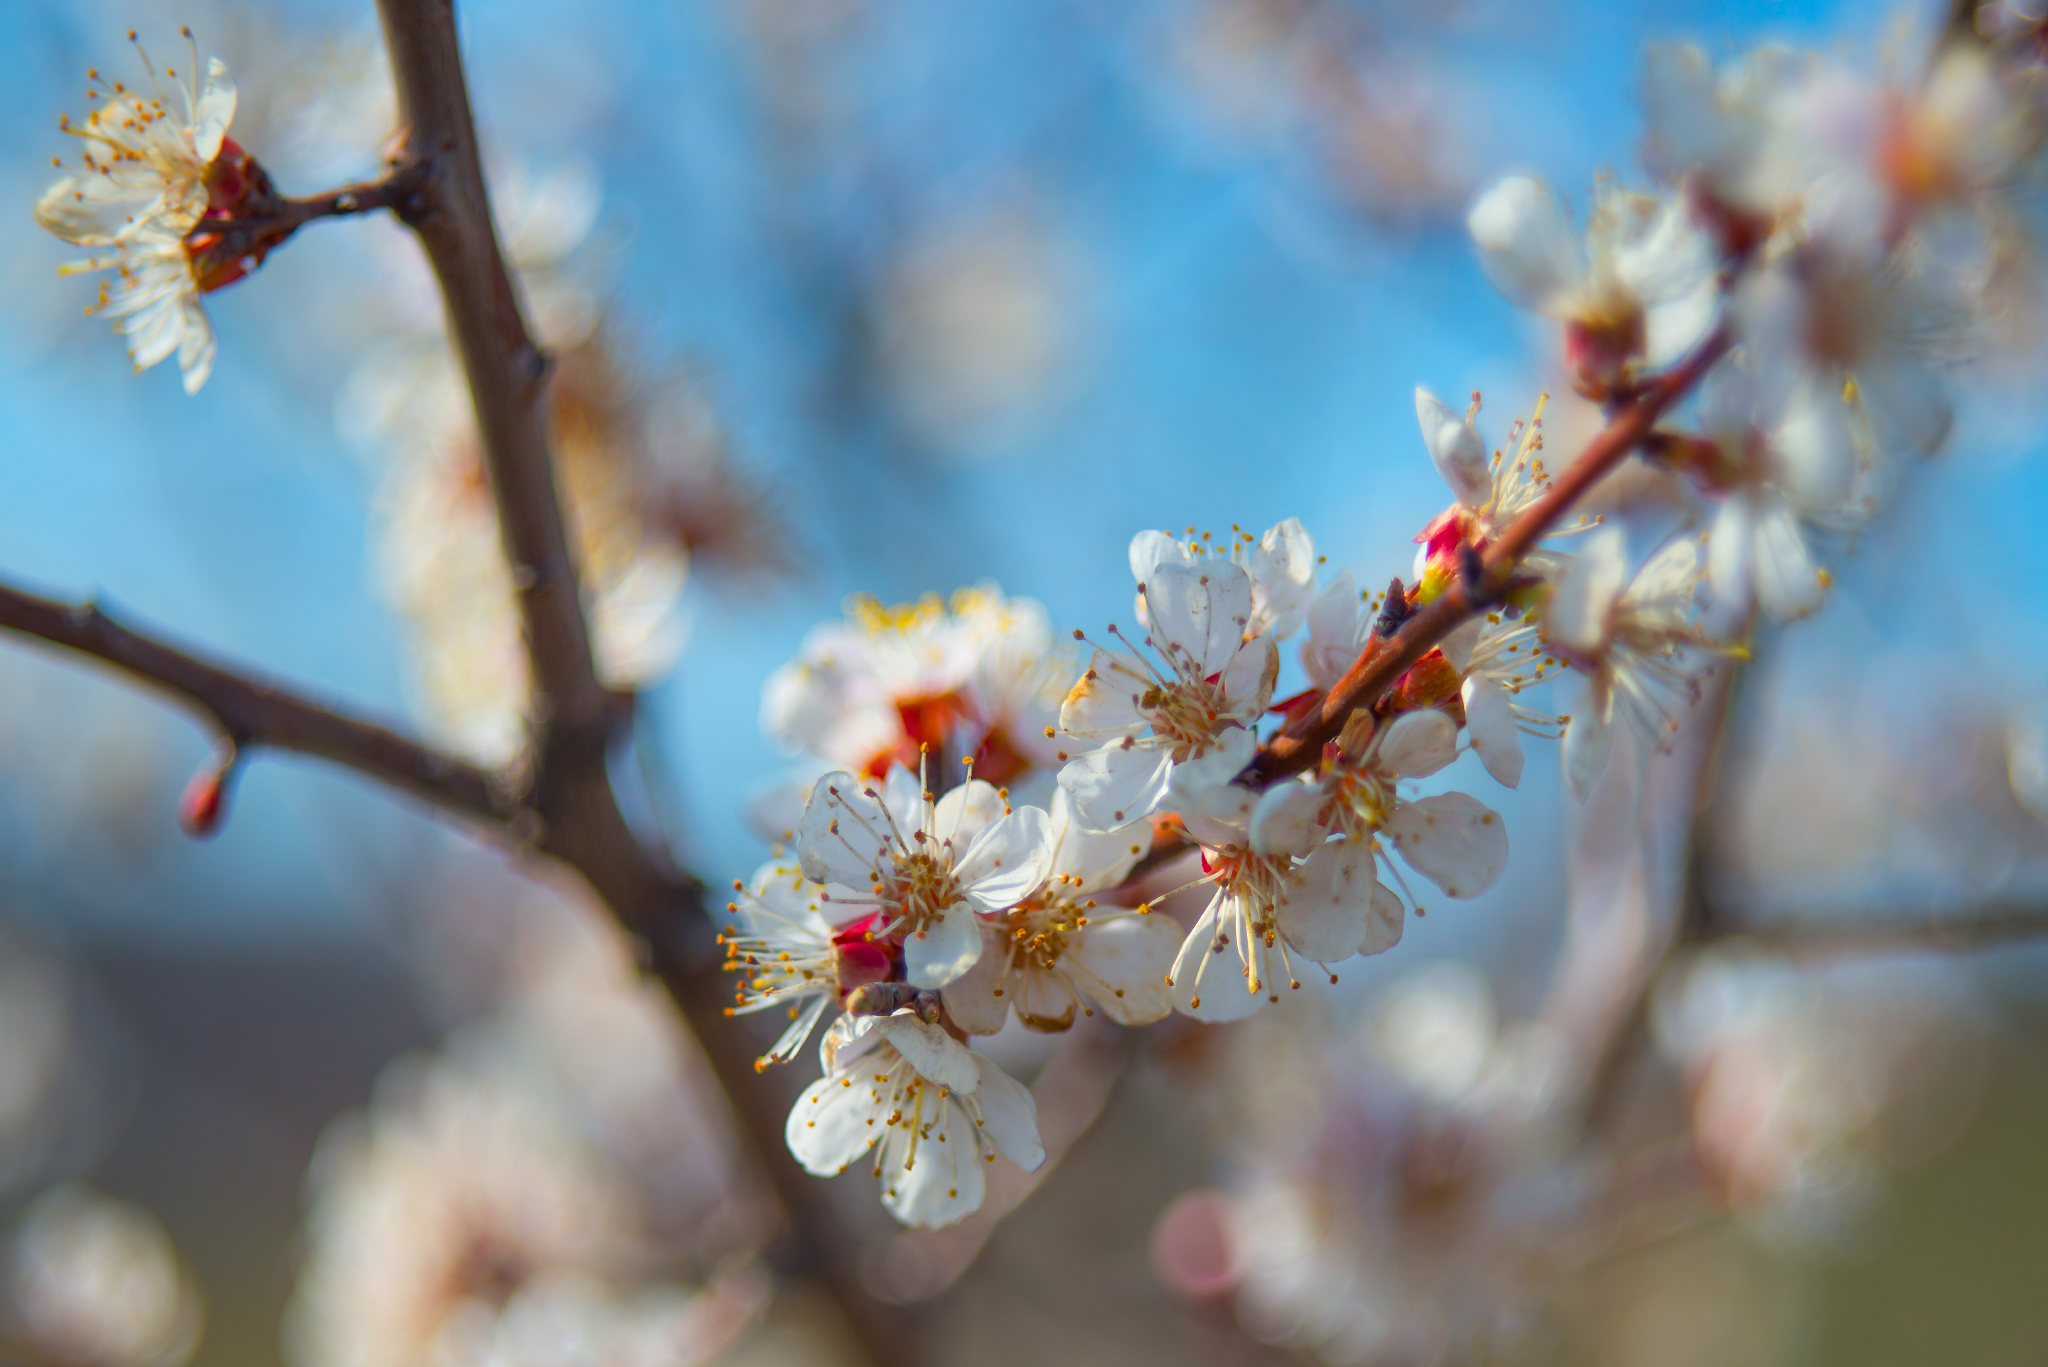 The trees have blossomed - My, Spring, Fruit trees, Helios-44, Longpost, Bloom